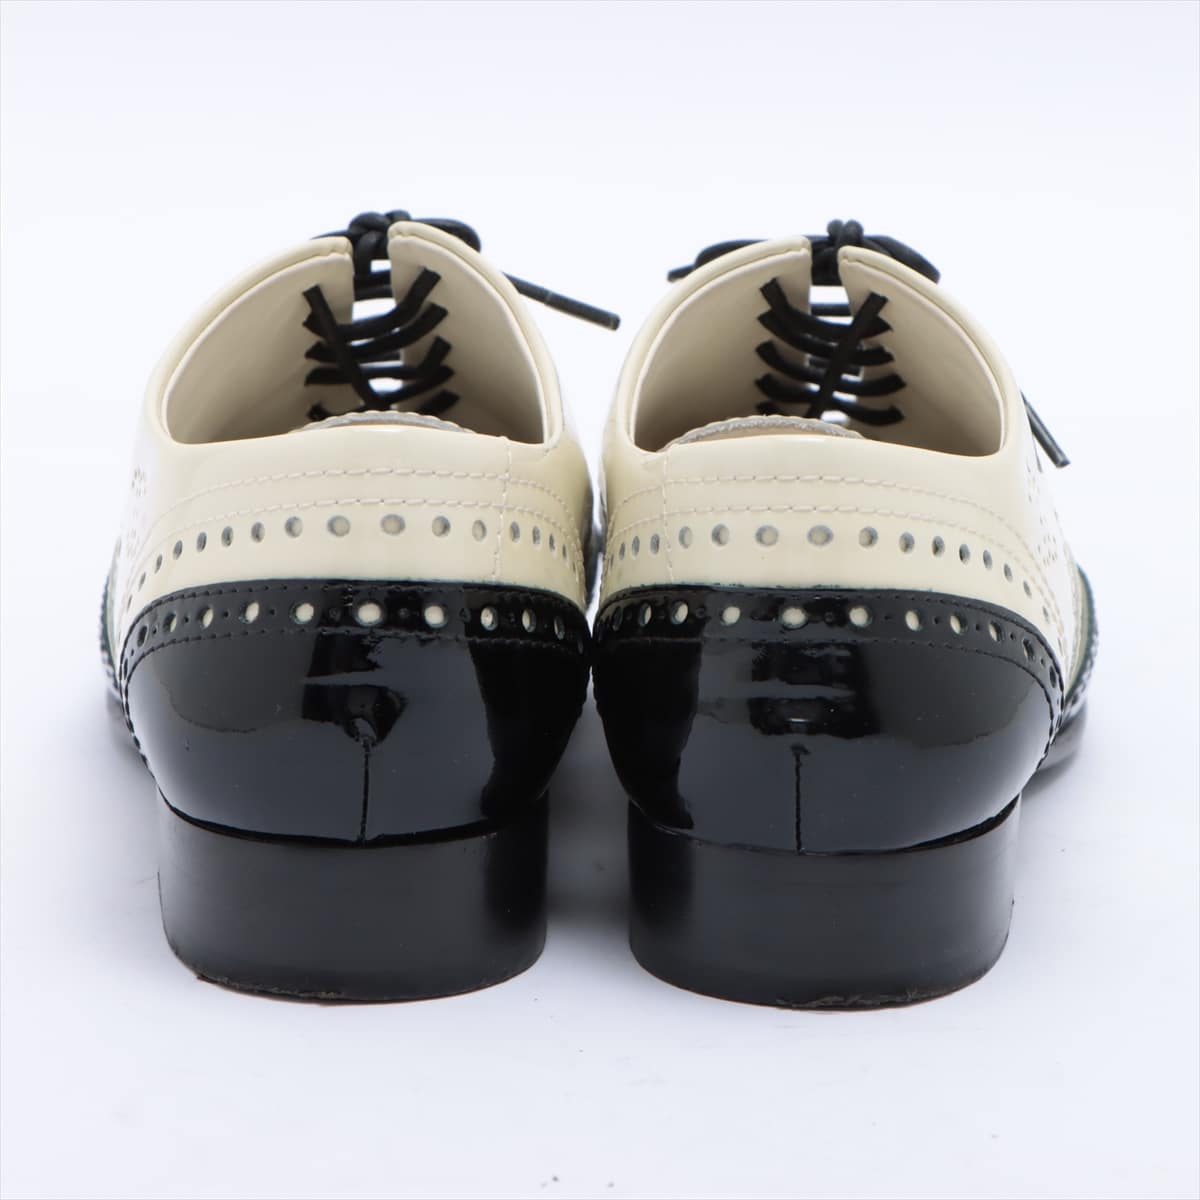 Chanel Patent leather Dress shoes 37 Ladies' Black × White G31213 wingtip